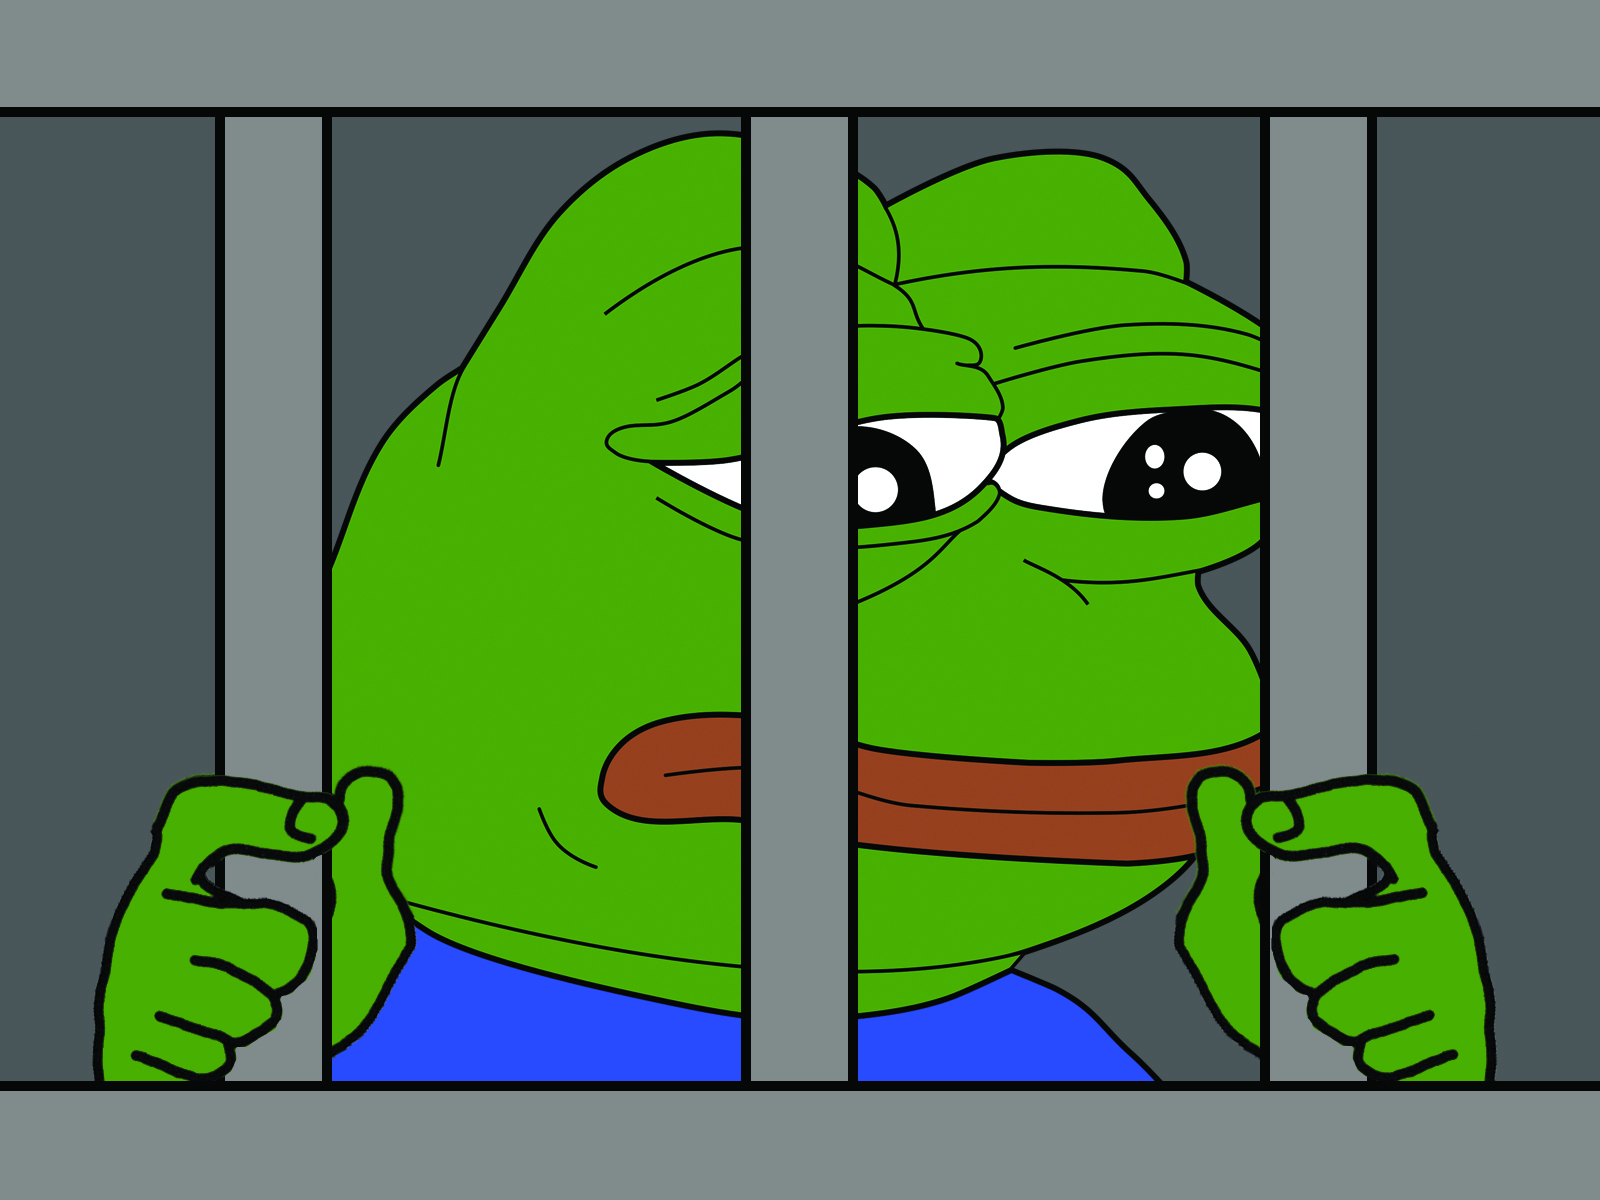 Graphic: Pepe the Frog has been edited into a jail cell. Graphic by The Signal reporter Krista Kamp.